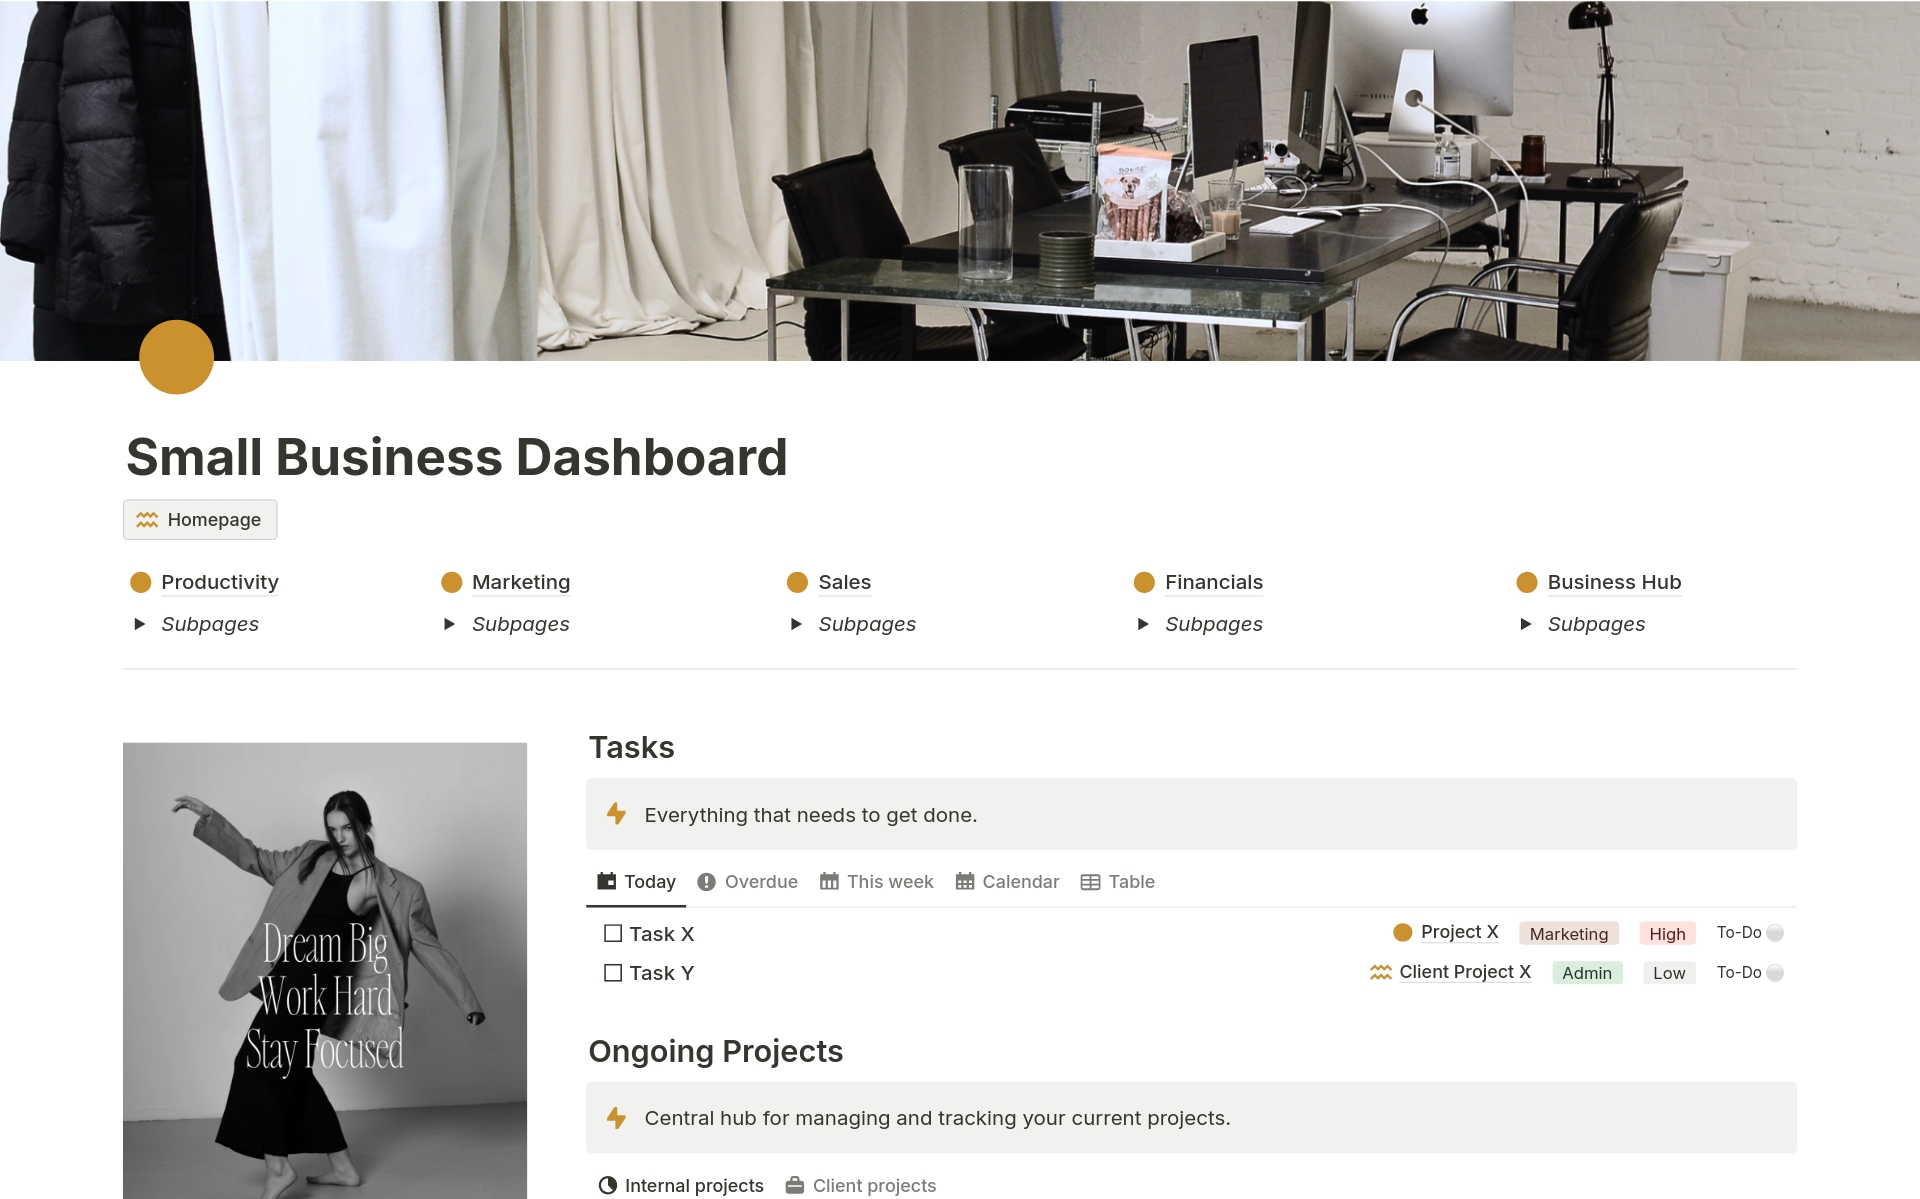 An all-in-one Small Business Dashboard designed to streamline operations, boost productivity, and drive growth for your business.